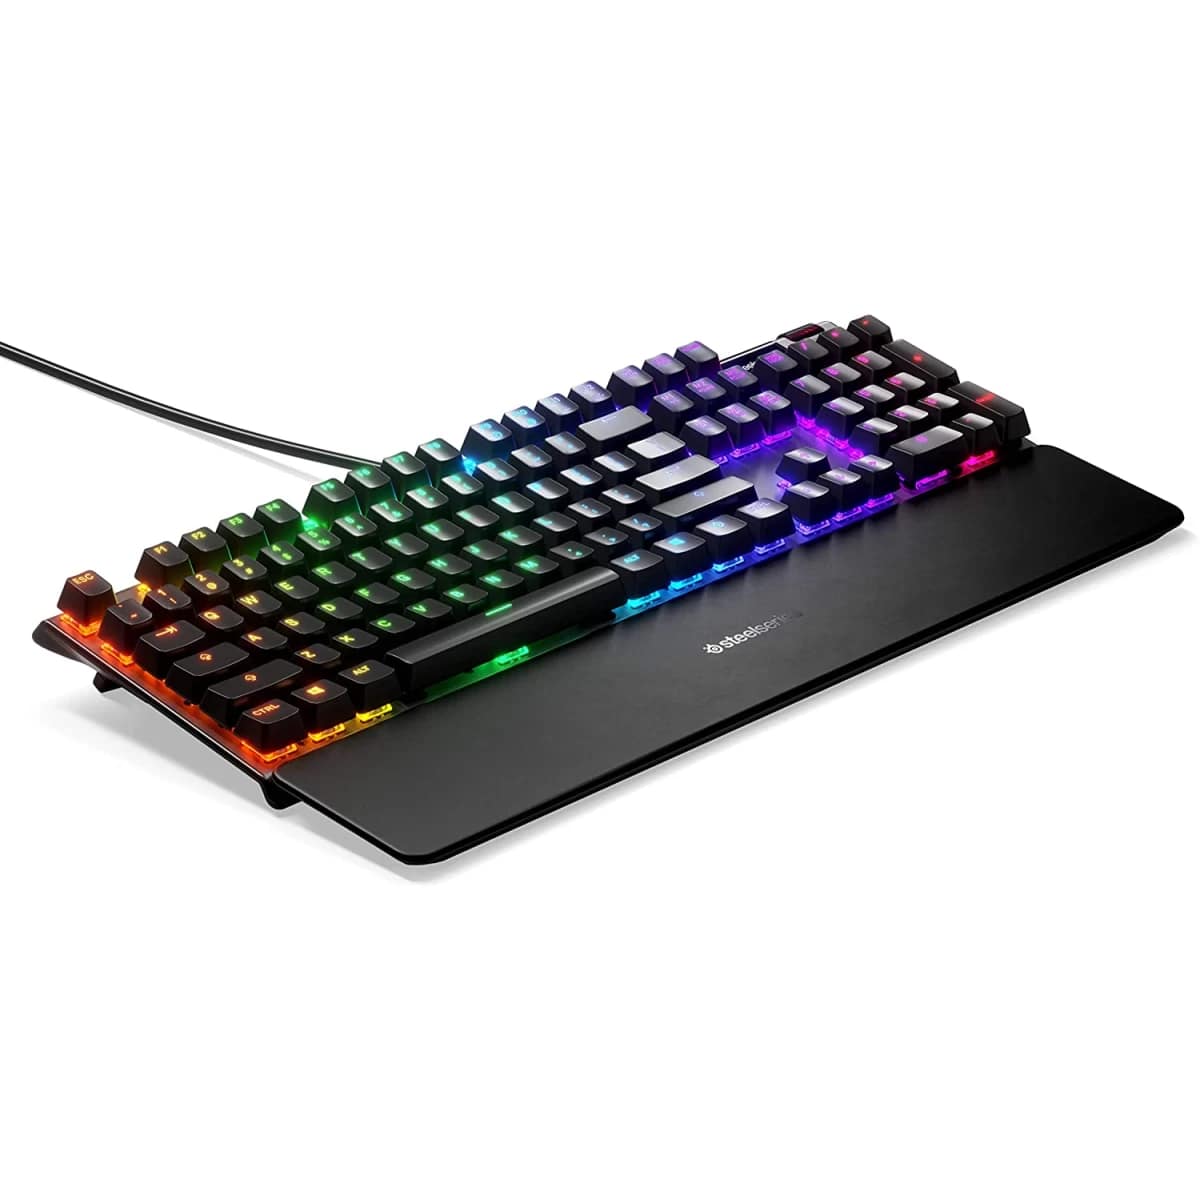 Apex Pro Mechanical Keyboard with Adjustable Actuation Keys from SteelSeries